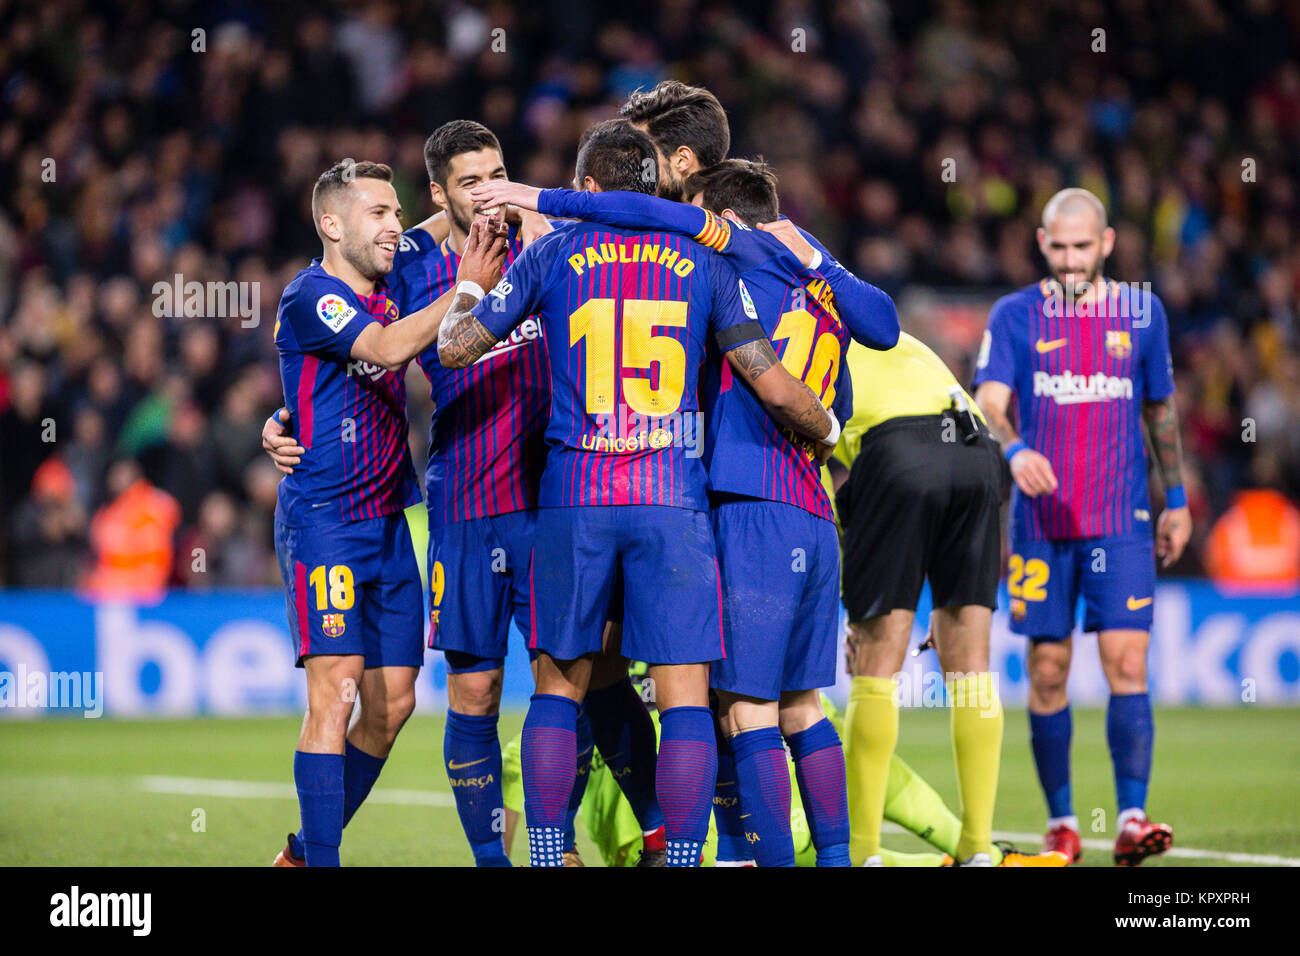 Barcelona, Spain. 17th Dec, 2017. SPAIN - 17th of December: Barcelona midfielder Paulinho (15) with his teammates of FC Barcelona celebrates after scoring the goal during the match between FC Barcelona against Deportivo Coruna, for the round 16 of the Liga Santander, played at Camp Nou Stadium on 17th December 2017 in Barcelona, Spain. (Credit: GTO/Urbanandsport/Gtres Online) Credit: Gtres Información más Comuniación on line, S.L./Alamy Live News Stock Photo